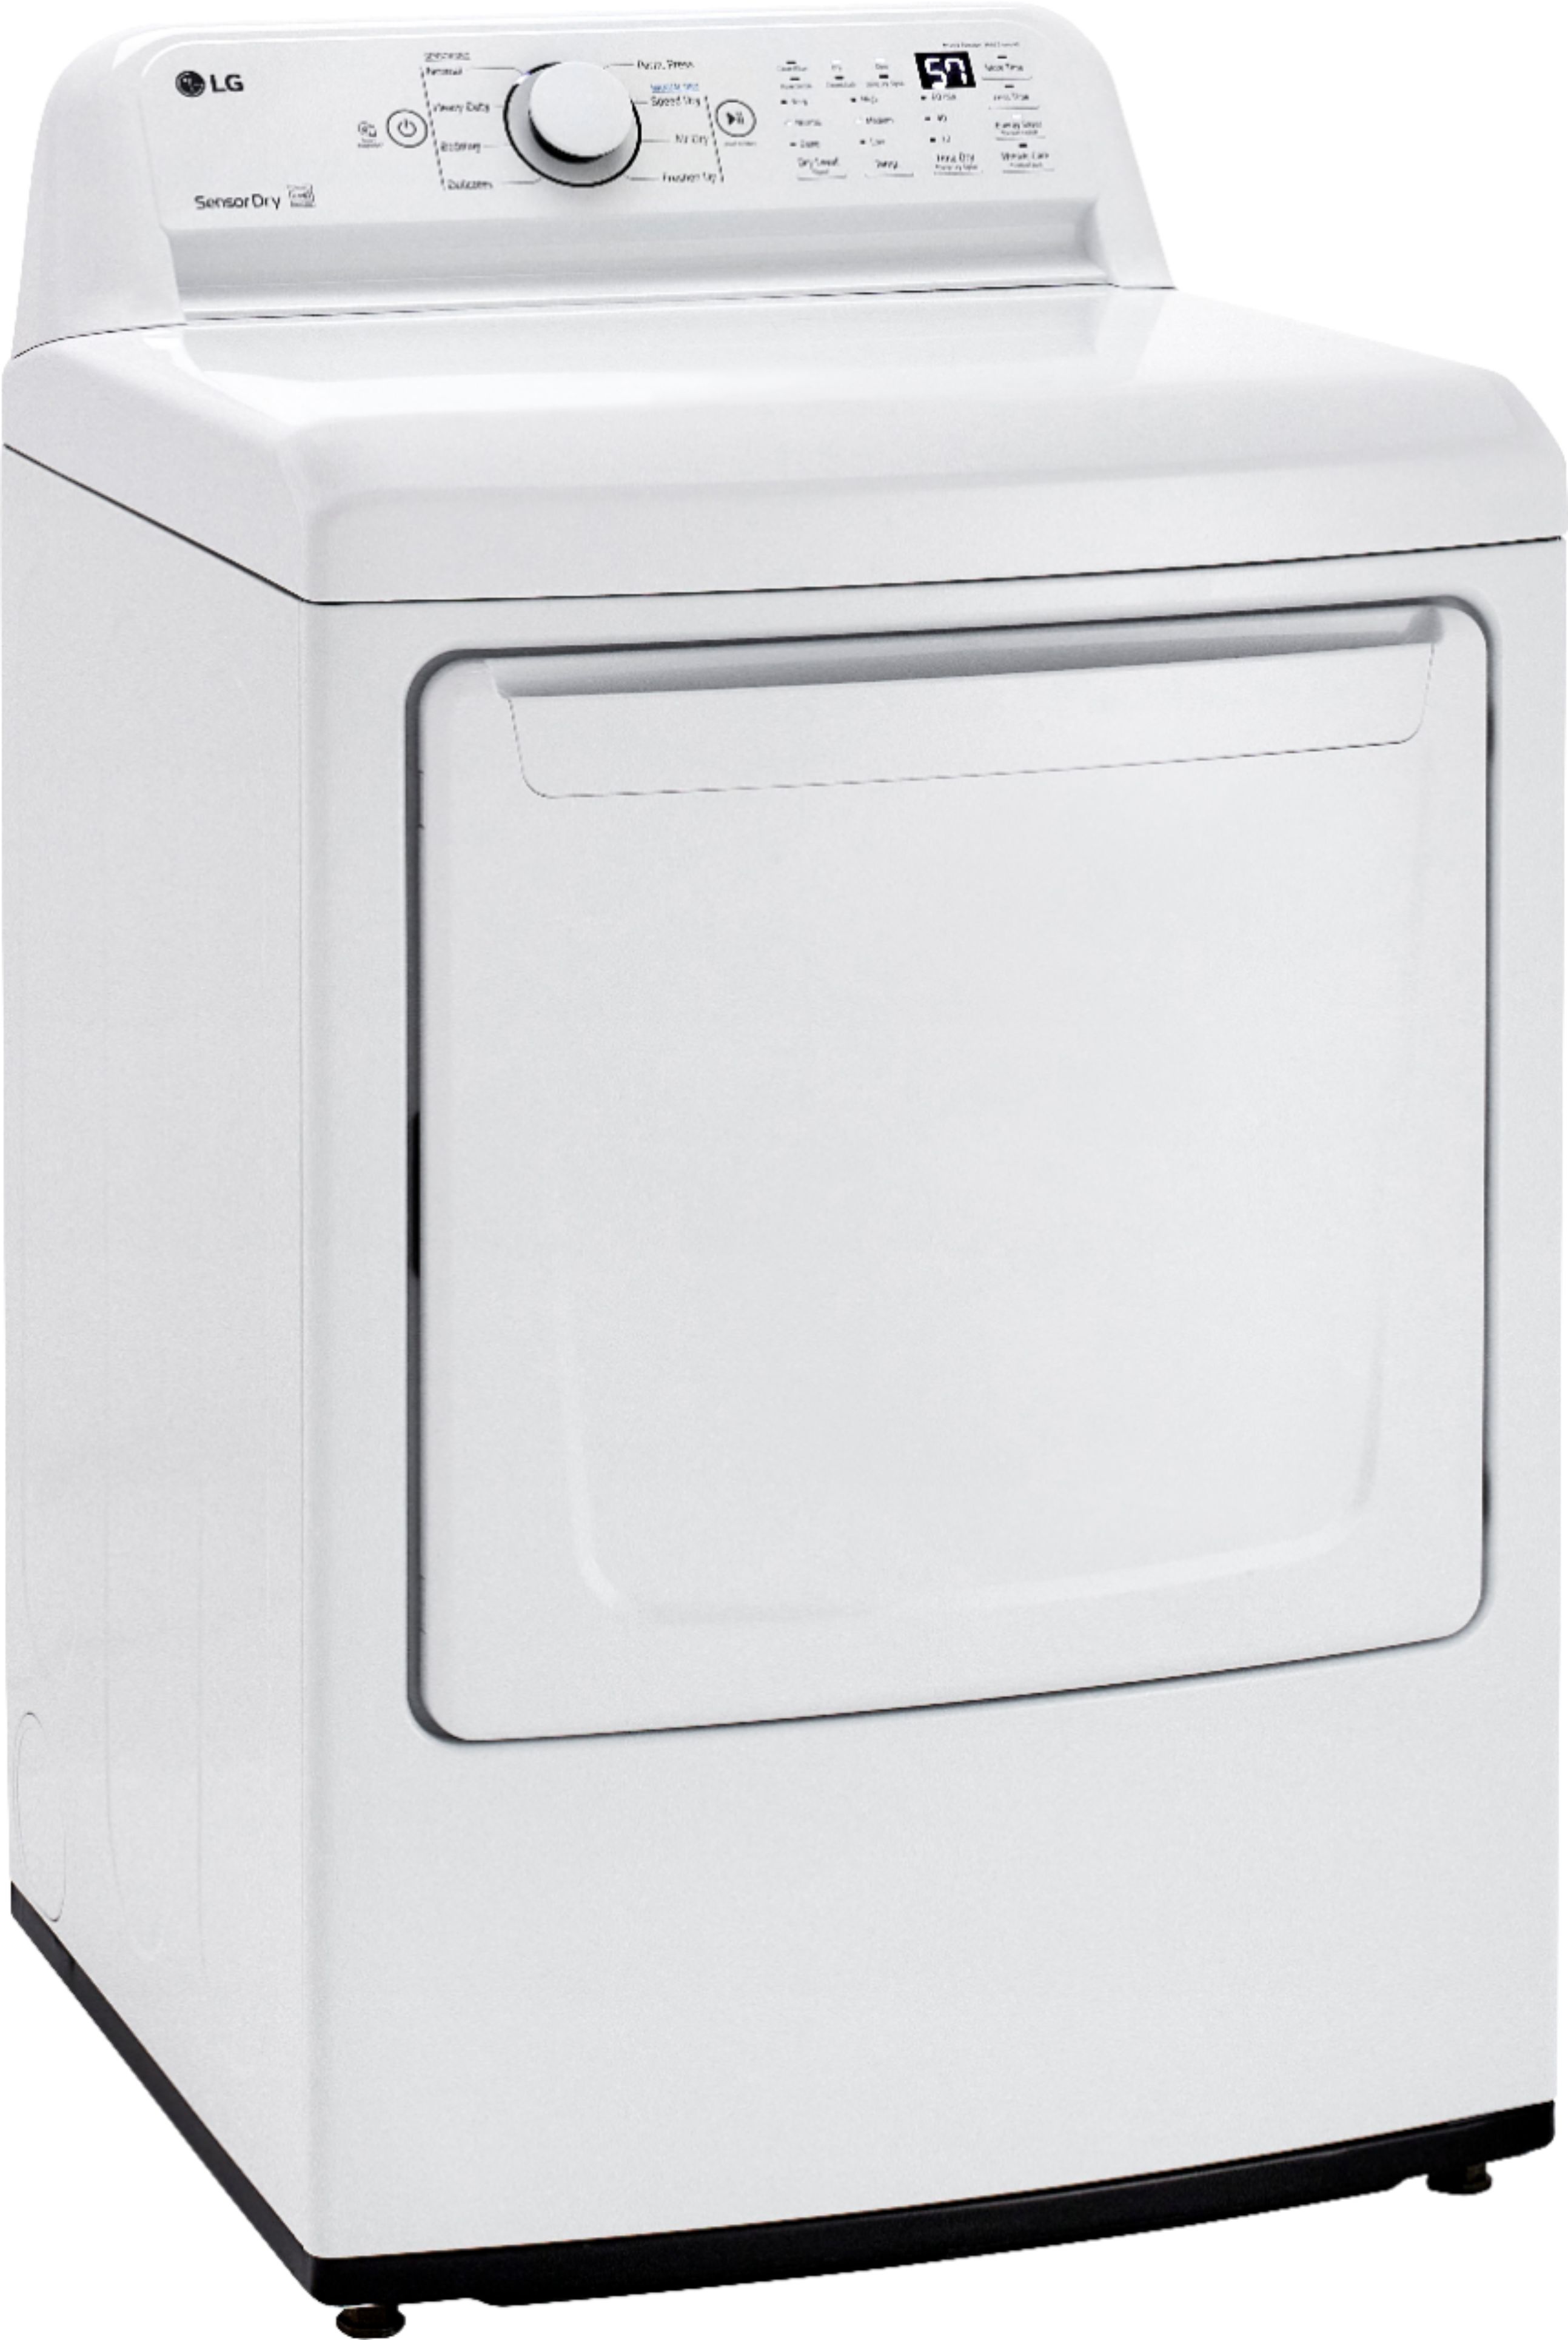 Angle View: LG - 7.3 cu ft Electric Dryer with Sensor Dry - White